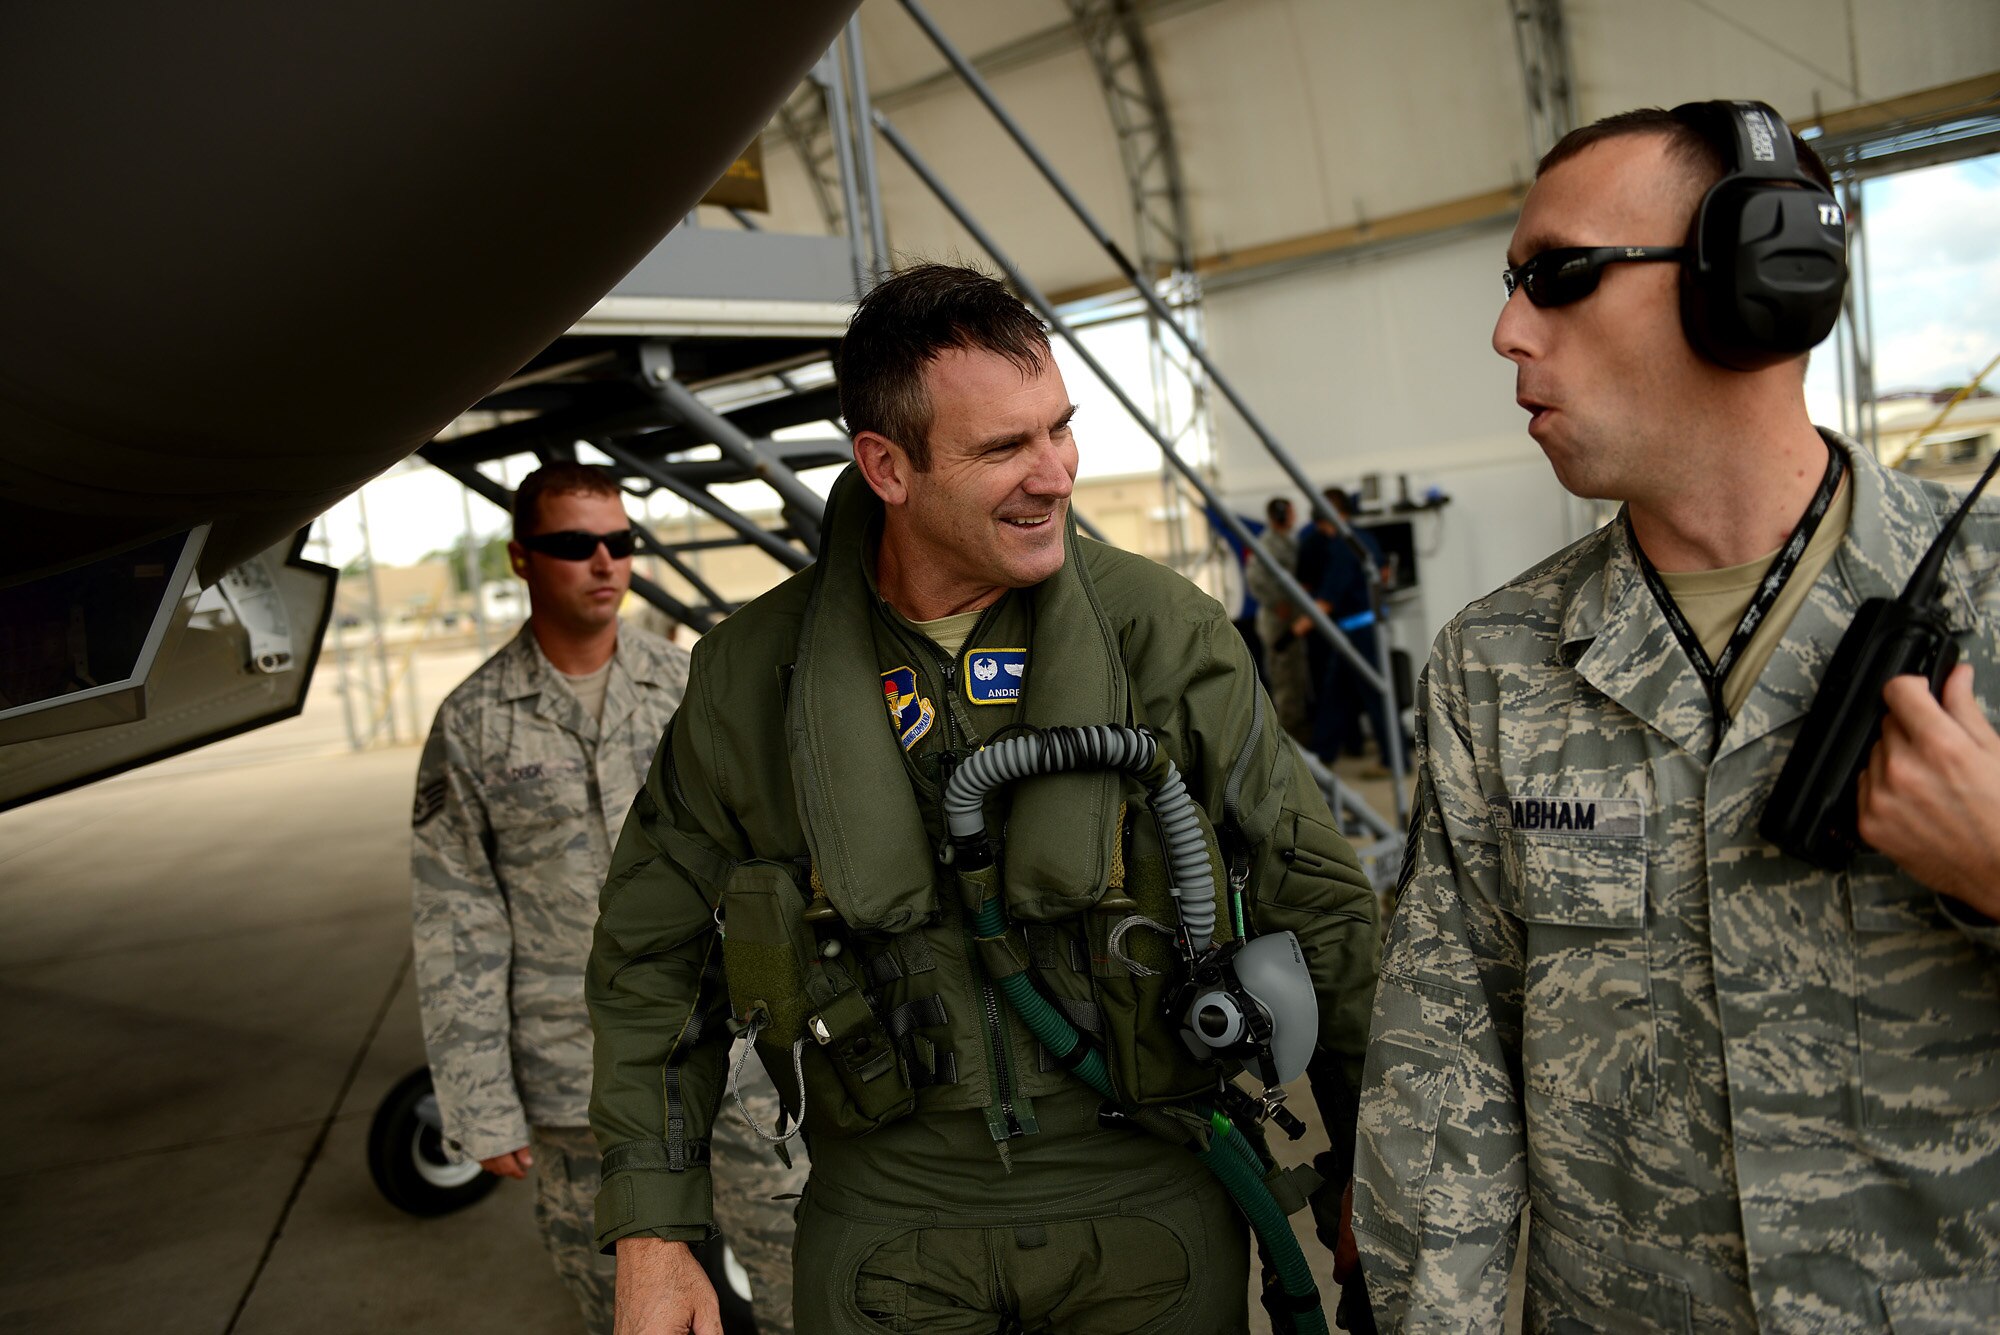 F-35A Lightning II joint strike fighter pilot wing commander Col. Andrew Toth from the 33rd Fighter Wing and production superintendent Master Sgt. Scott Grabham talk about his flight after flying a local training mission over the Emerald Coast Sept. 18, 2012 Eglin Air Force Base, Fla. (U.S. Air Force photo/Master Sgt. Jeremy T. Lock)